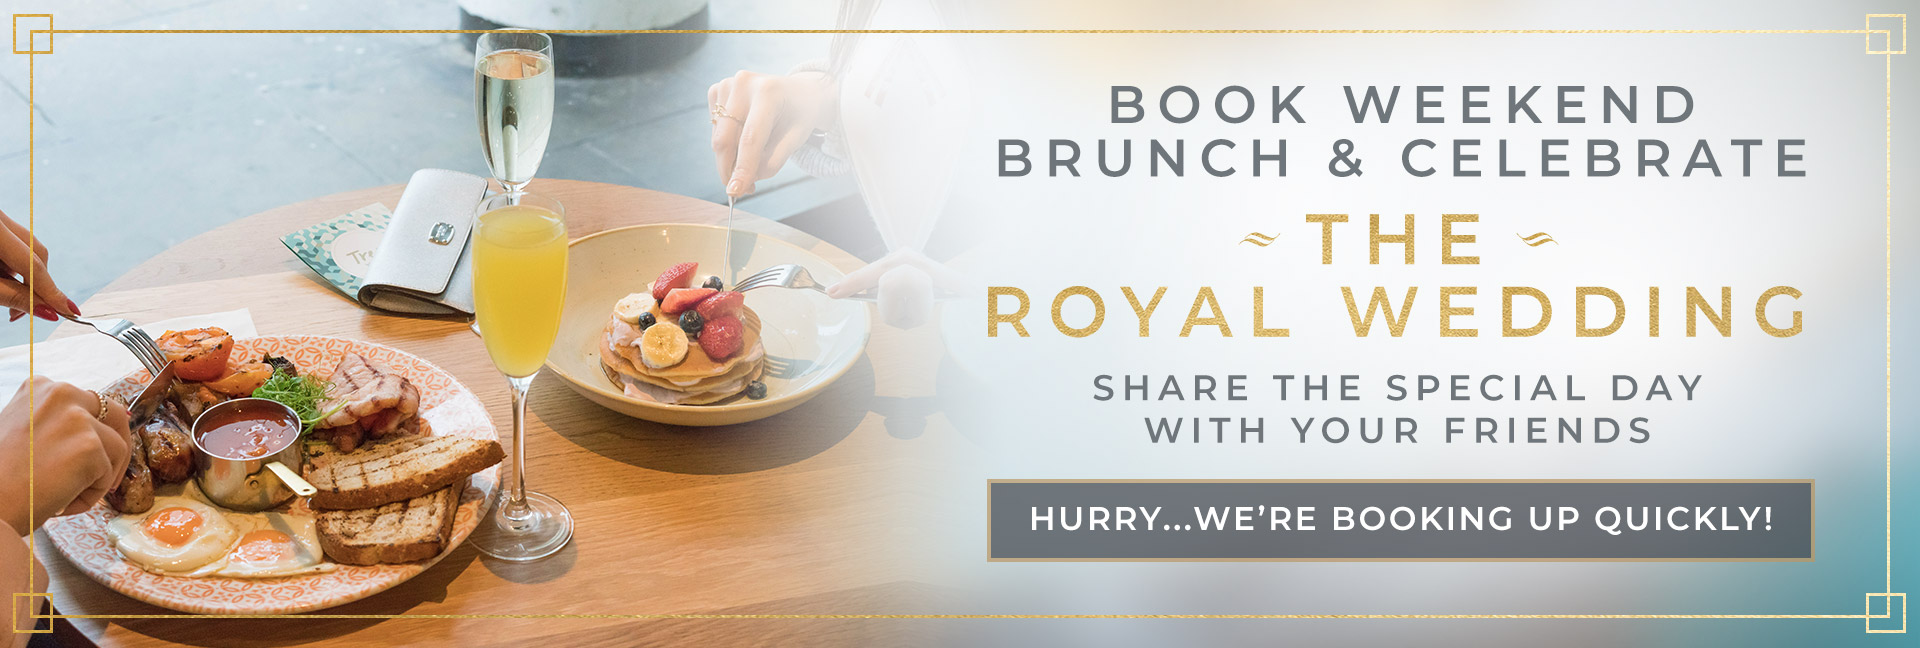 Brunch at All Bar One Windsor for the Royal Wedding Weekend